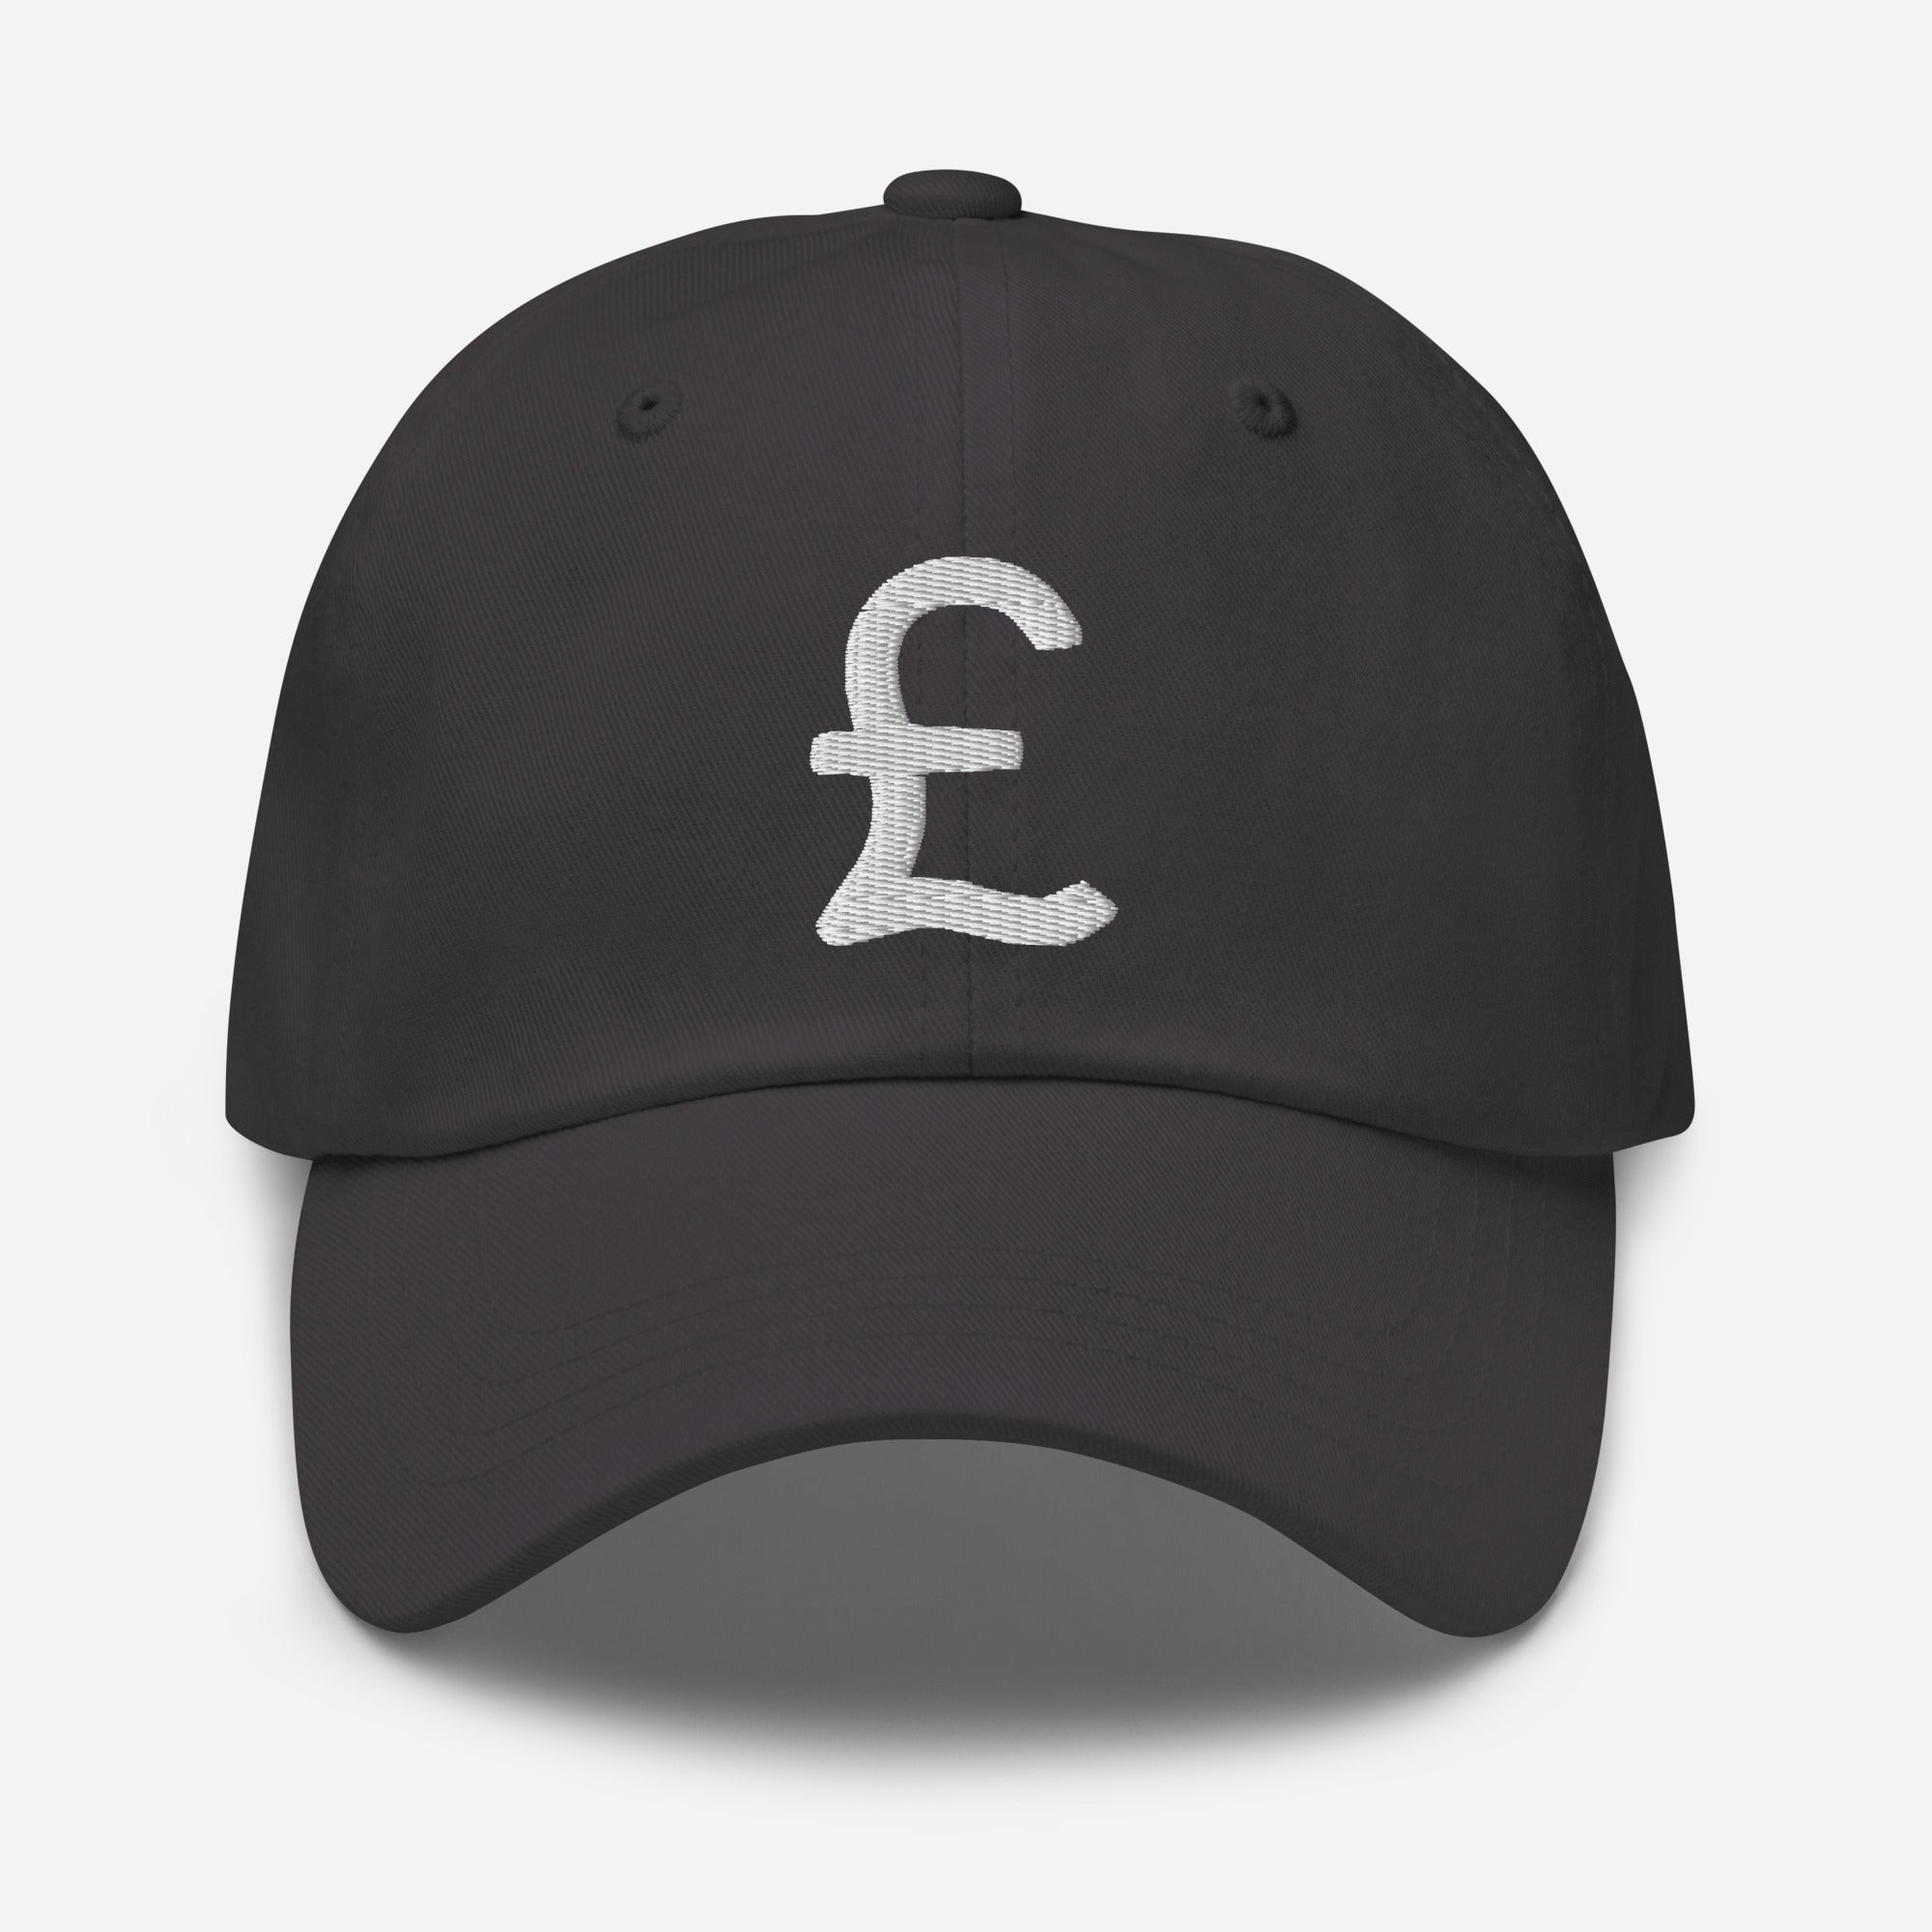 The British Pound Sterling Symbol Money Currency Embroidered Baseball Cap Dad hat